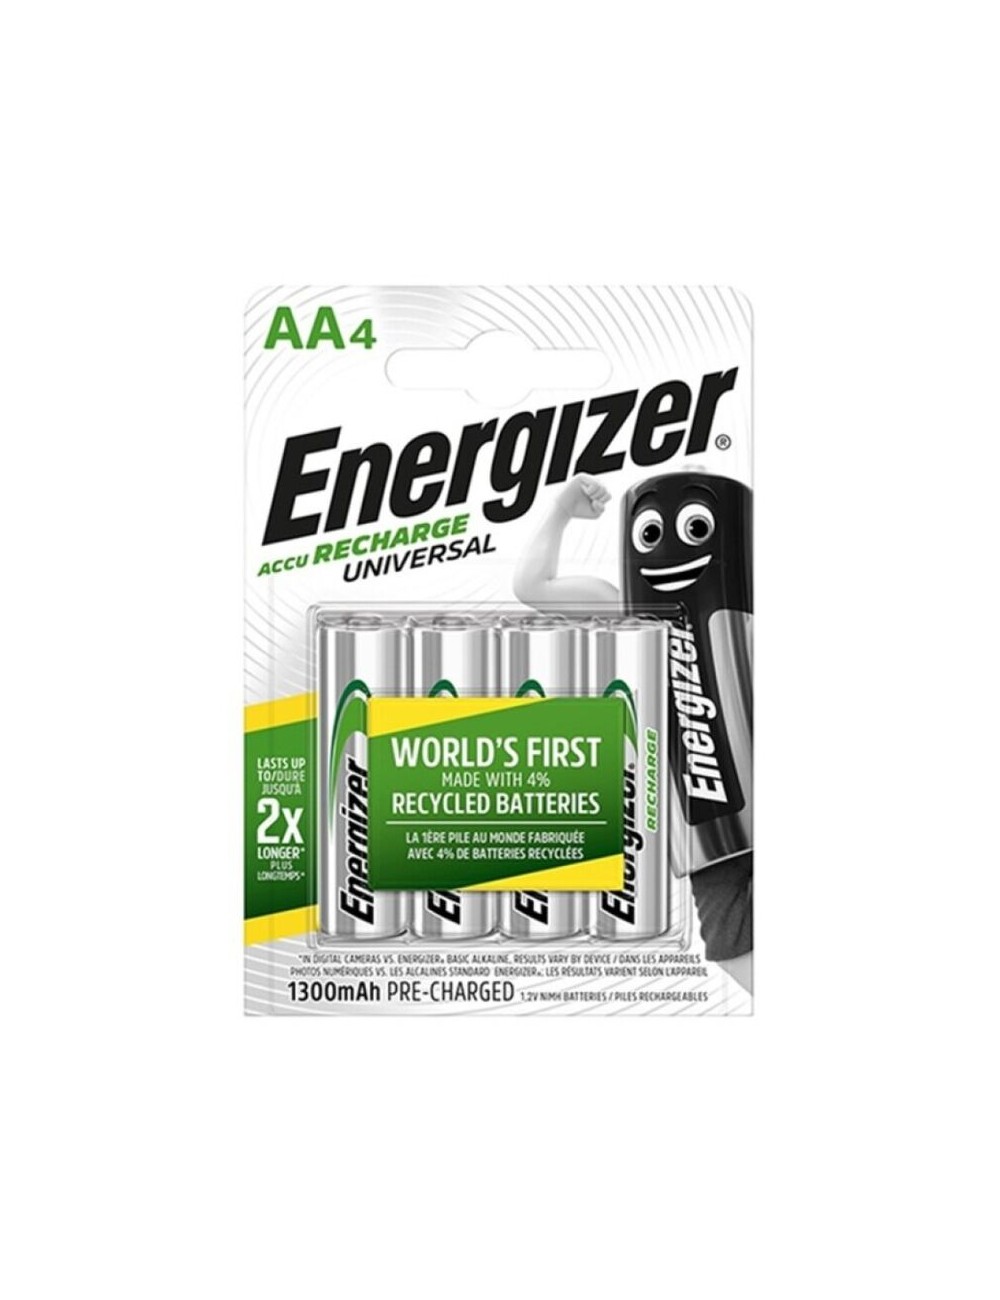 ENERGIZER UNIVERSAL RECHARGEABLE BATTERY HR6 AA 1300mAh 4 UNIT